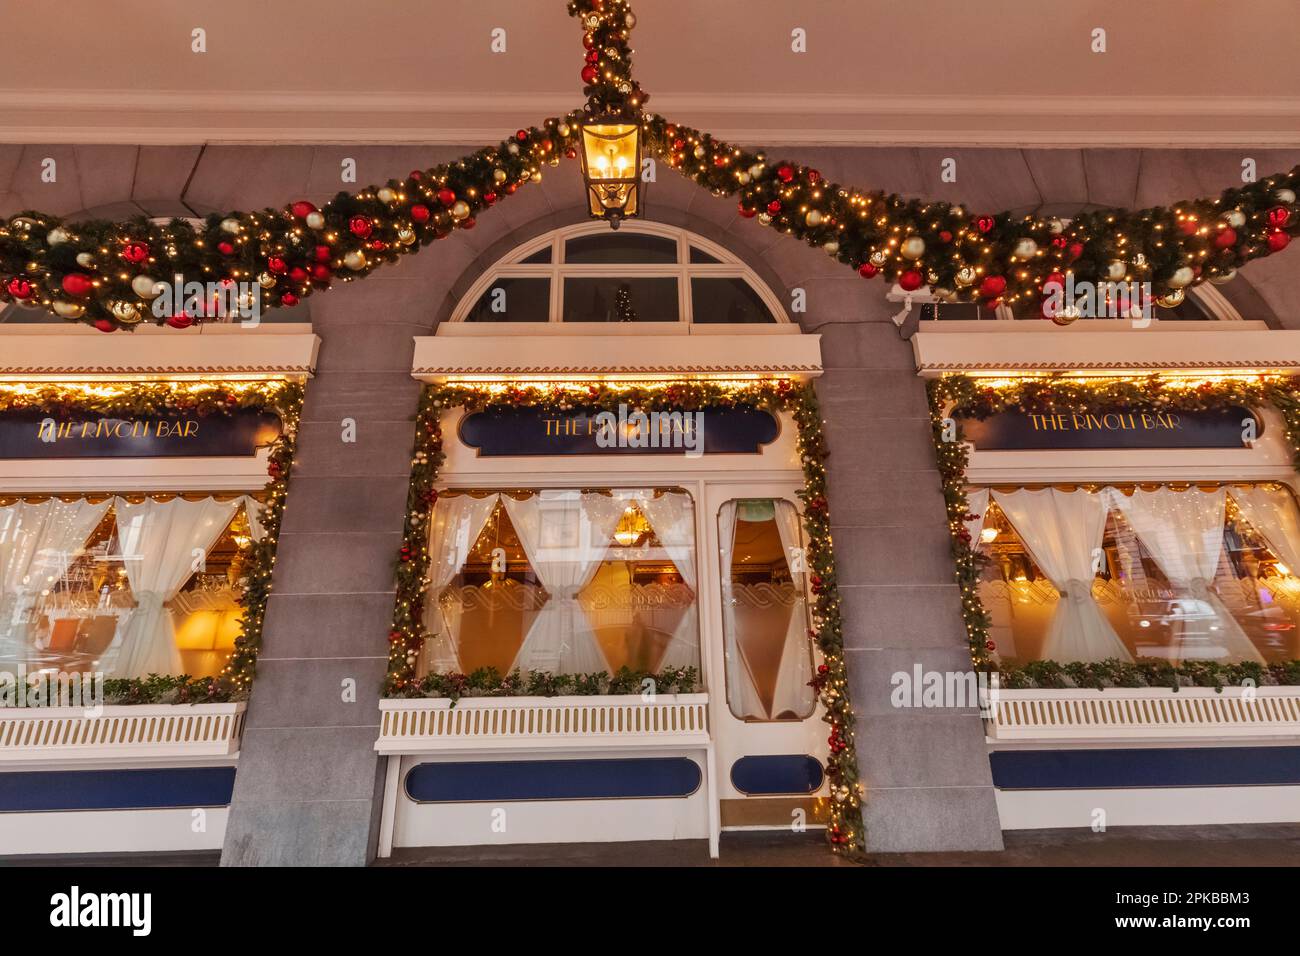 England, London, Piccadilly, Ritz Hotel, Exterior View of The Rivoli Bar and Christmas Decoration Stock Photo